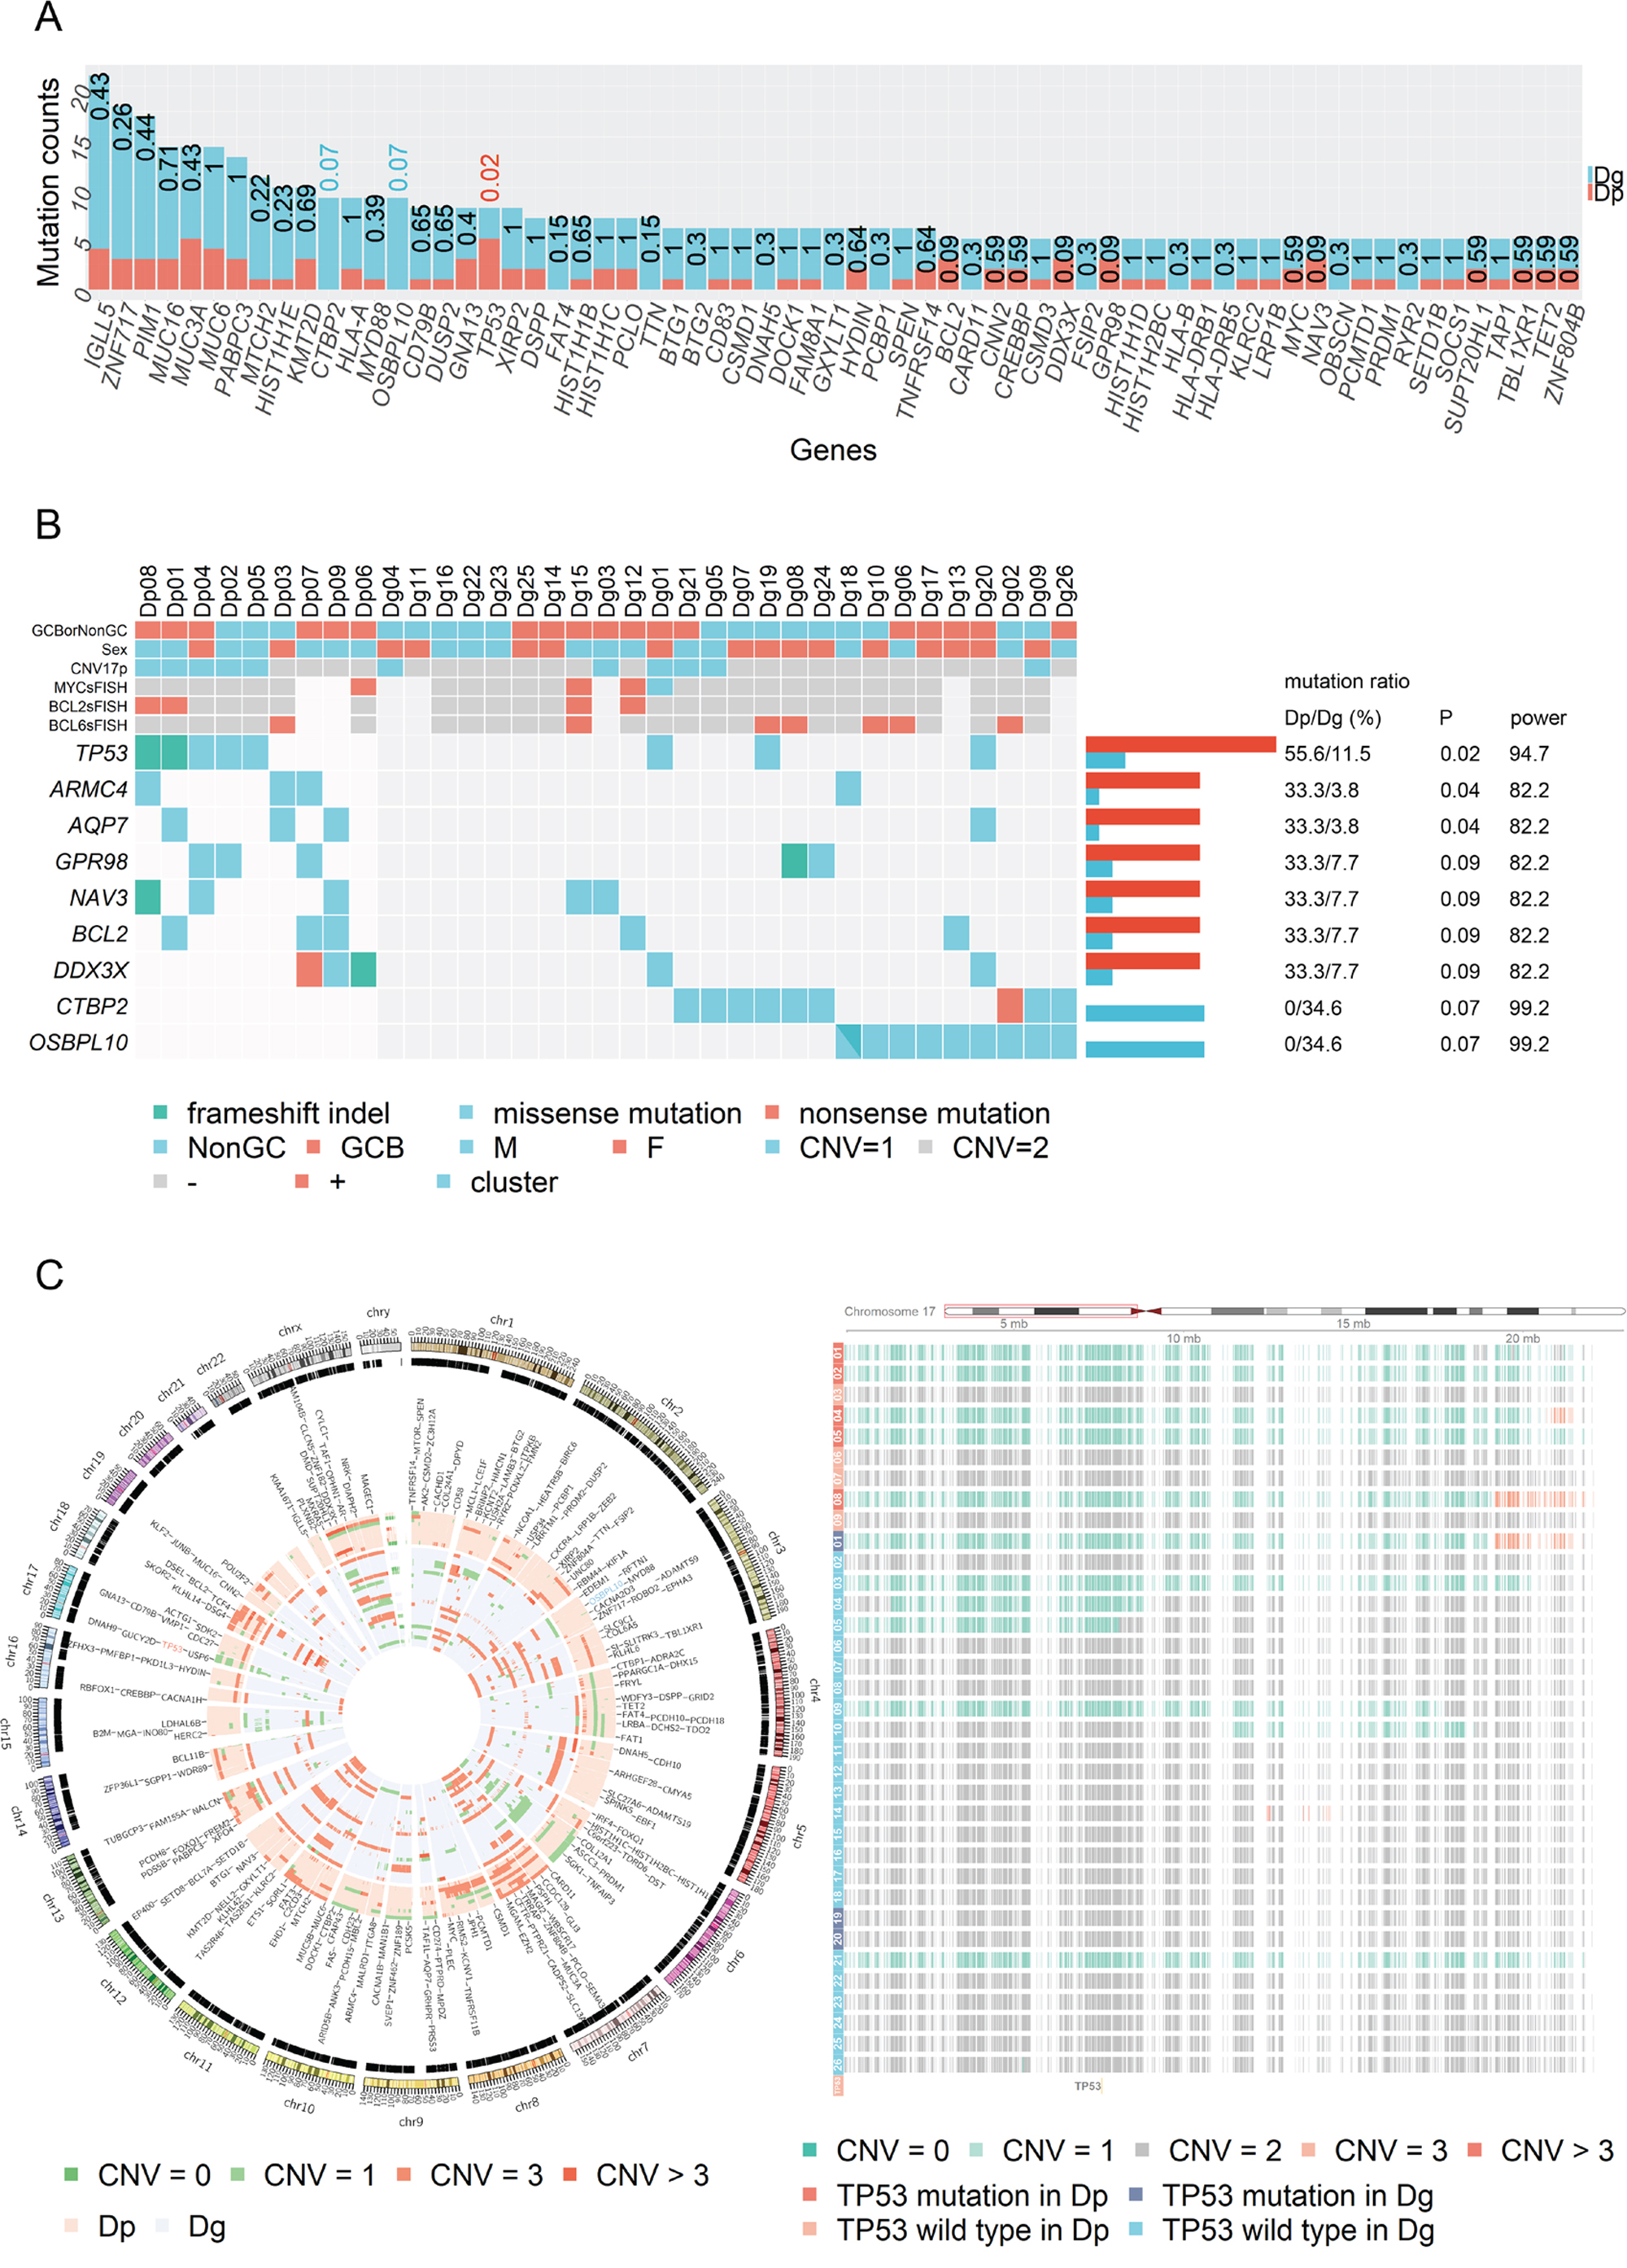 Mutational landscape and copy number variation in the discovery cohort.